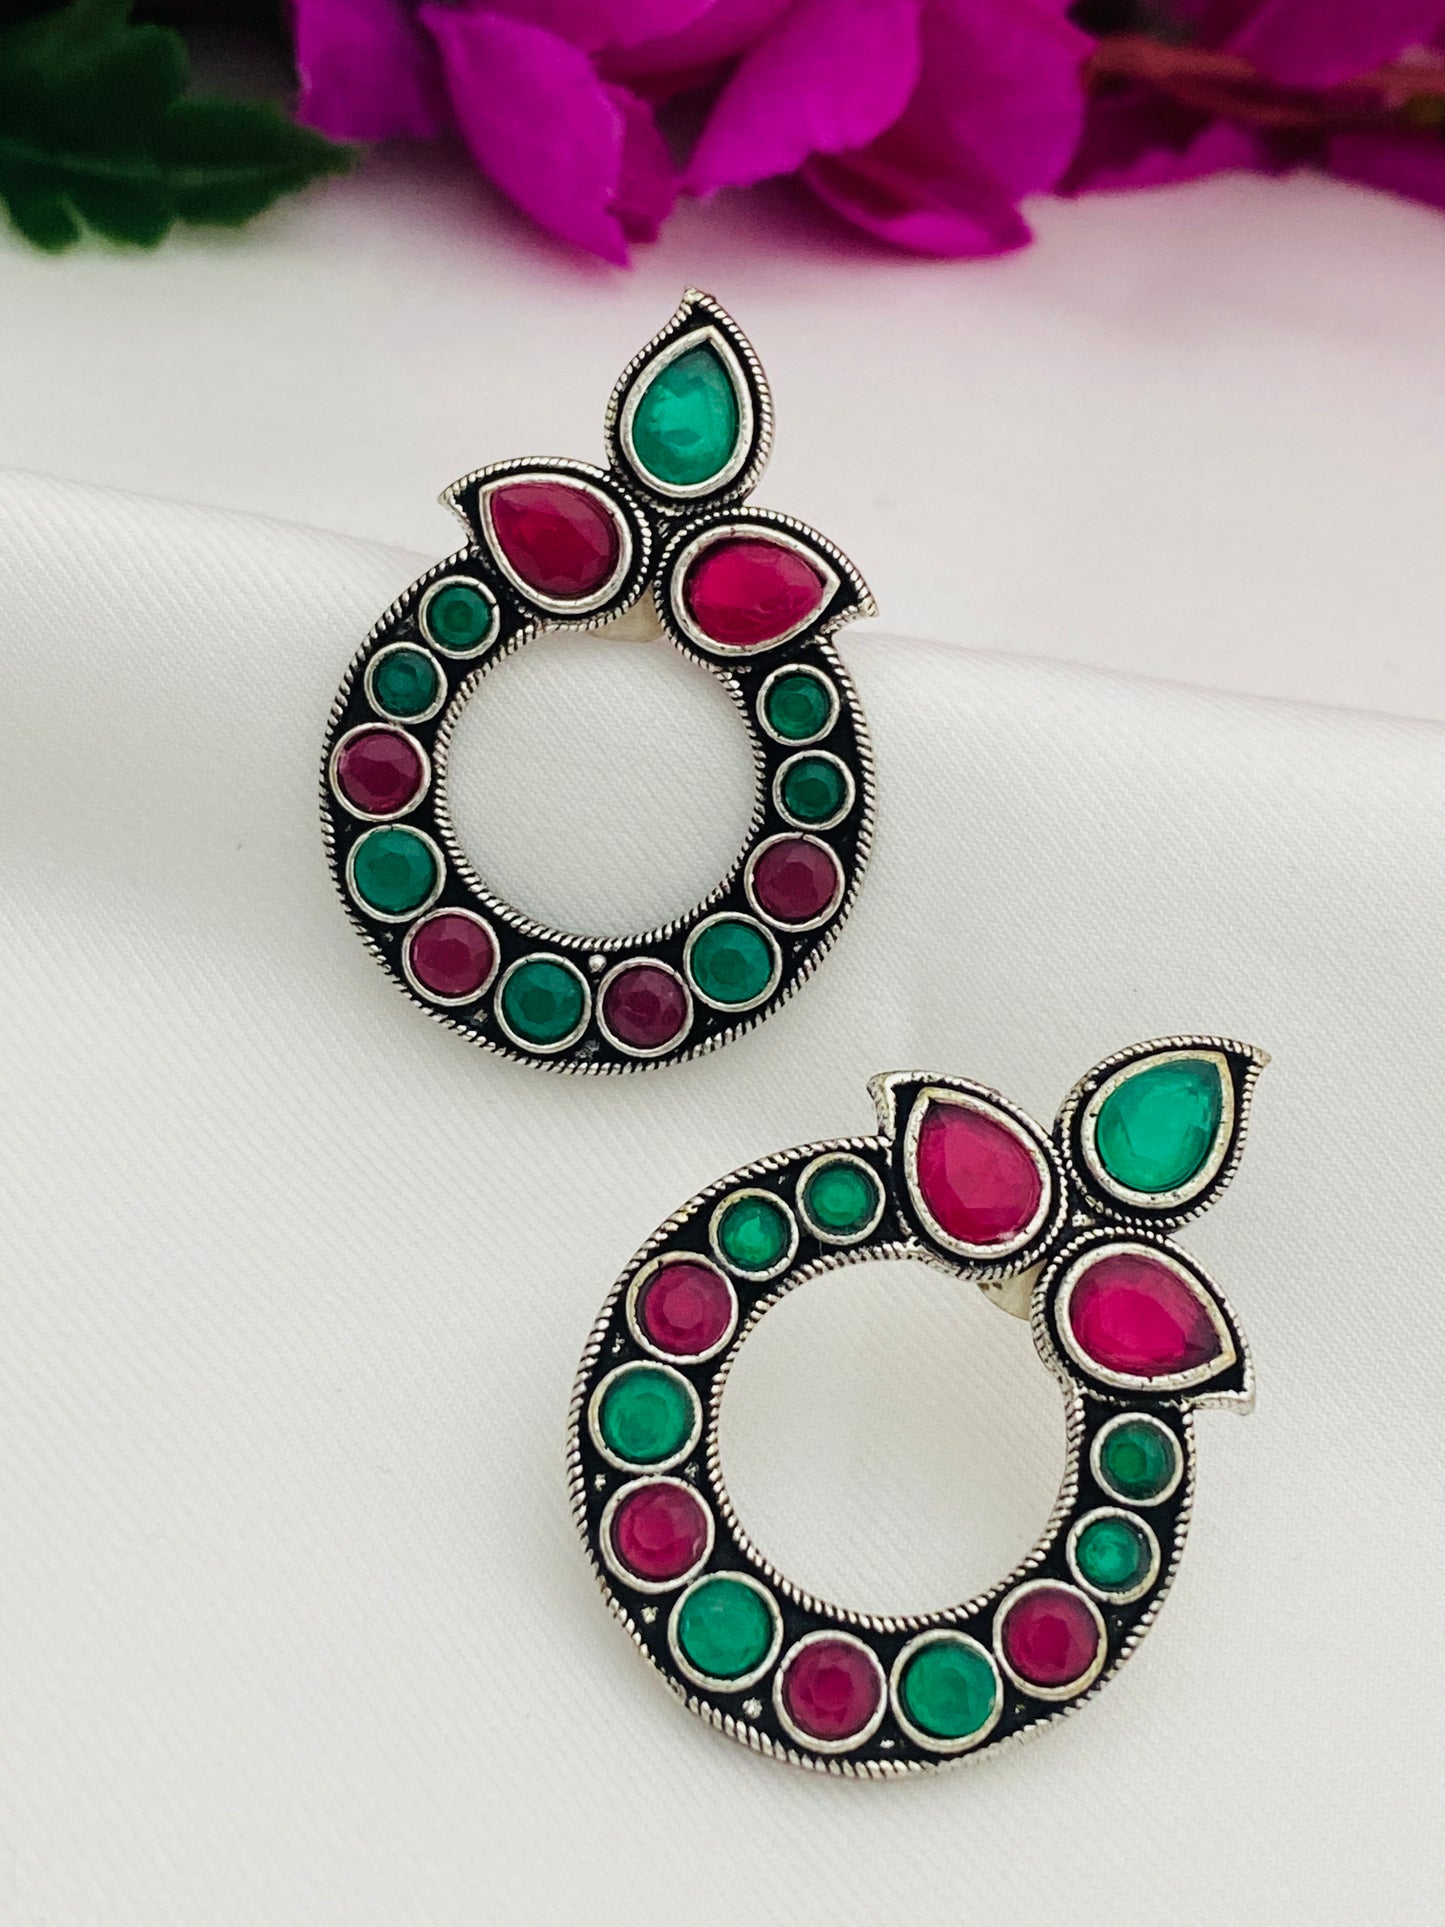 Attractive Multicolor Rounded Design Silver Oxidized Earrings For Women Near Me